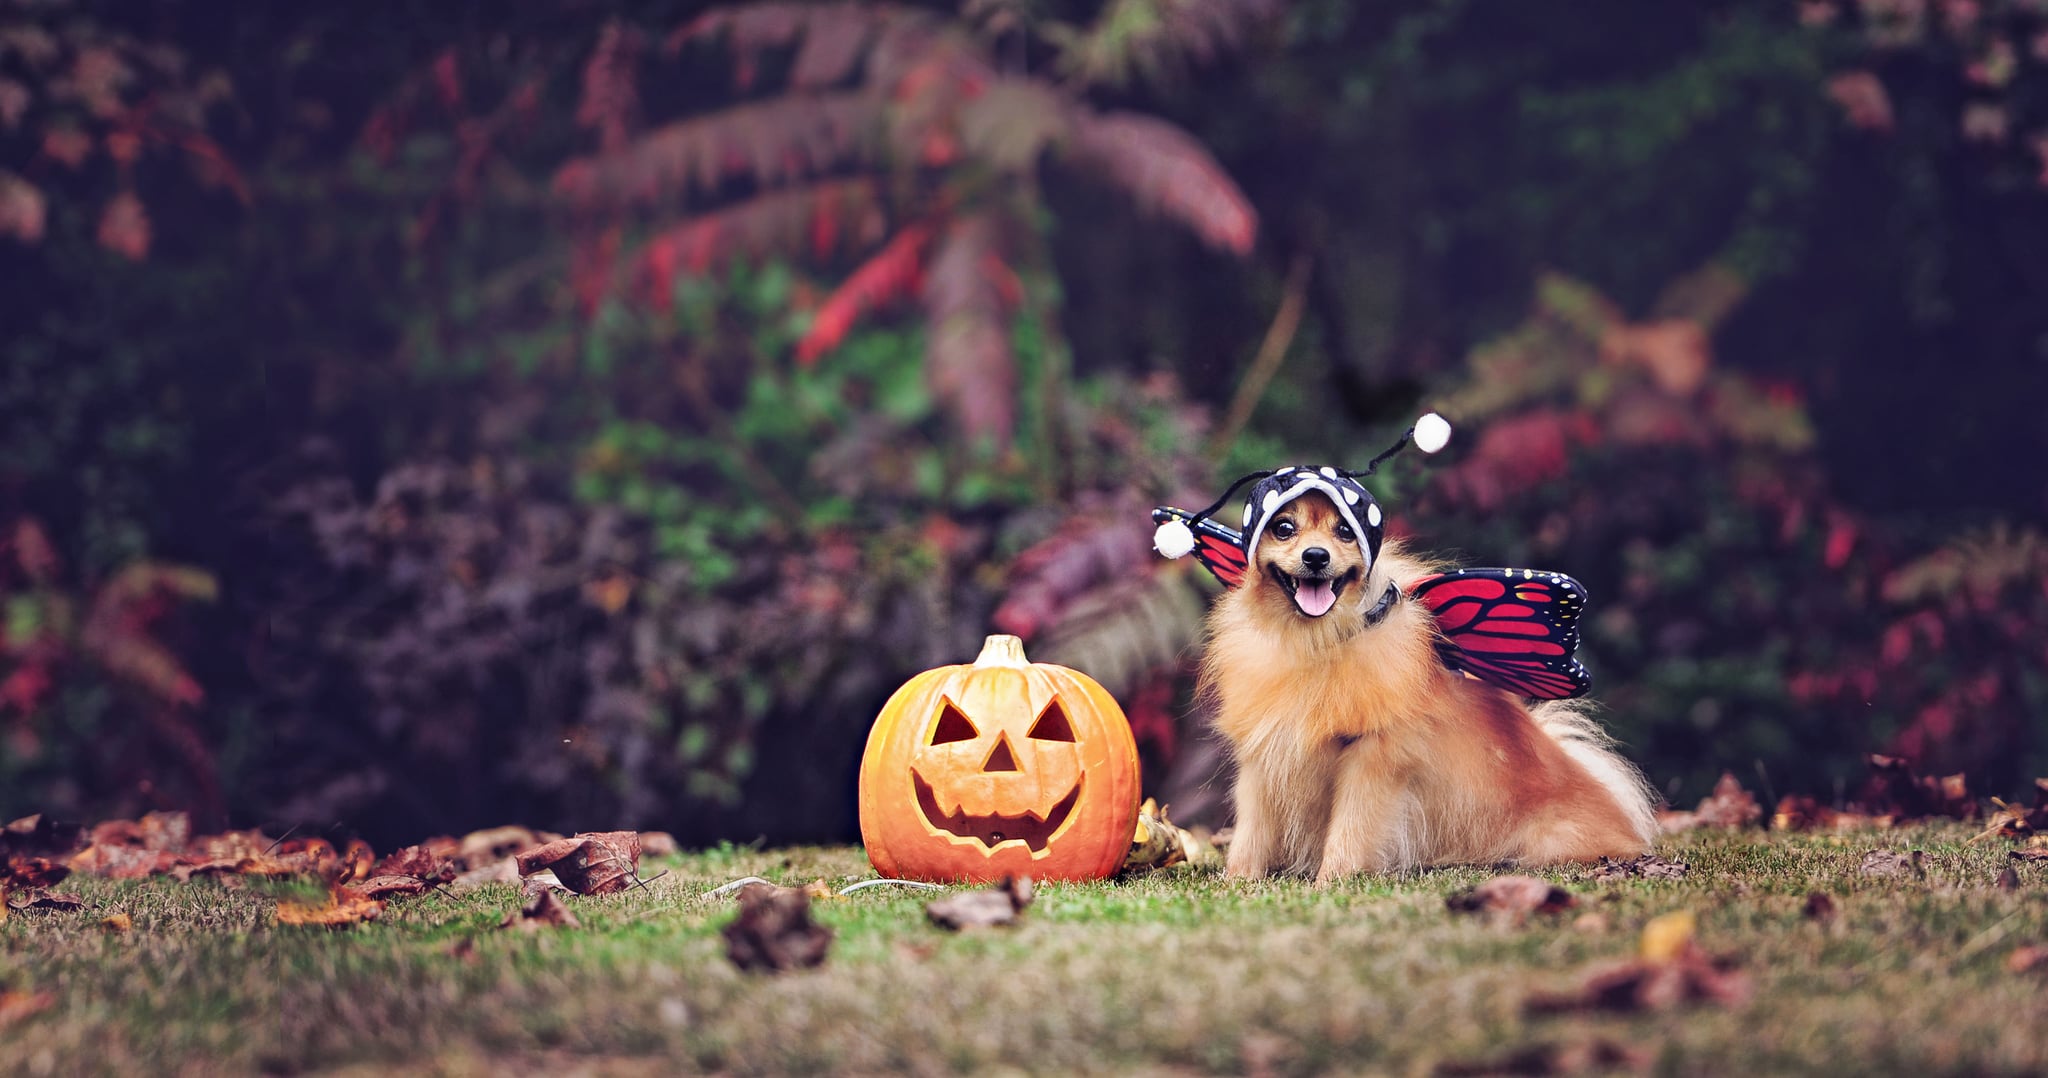 Cute Photo of Dogs in the Fall